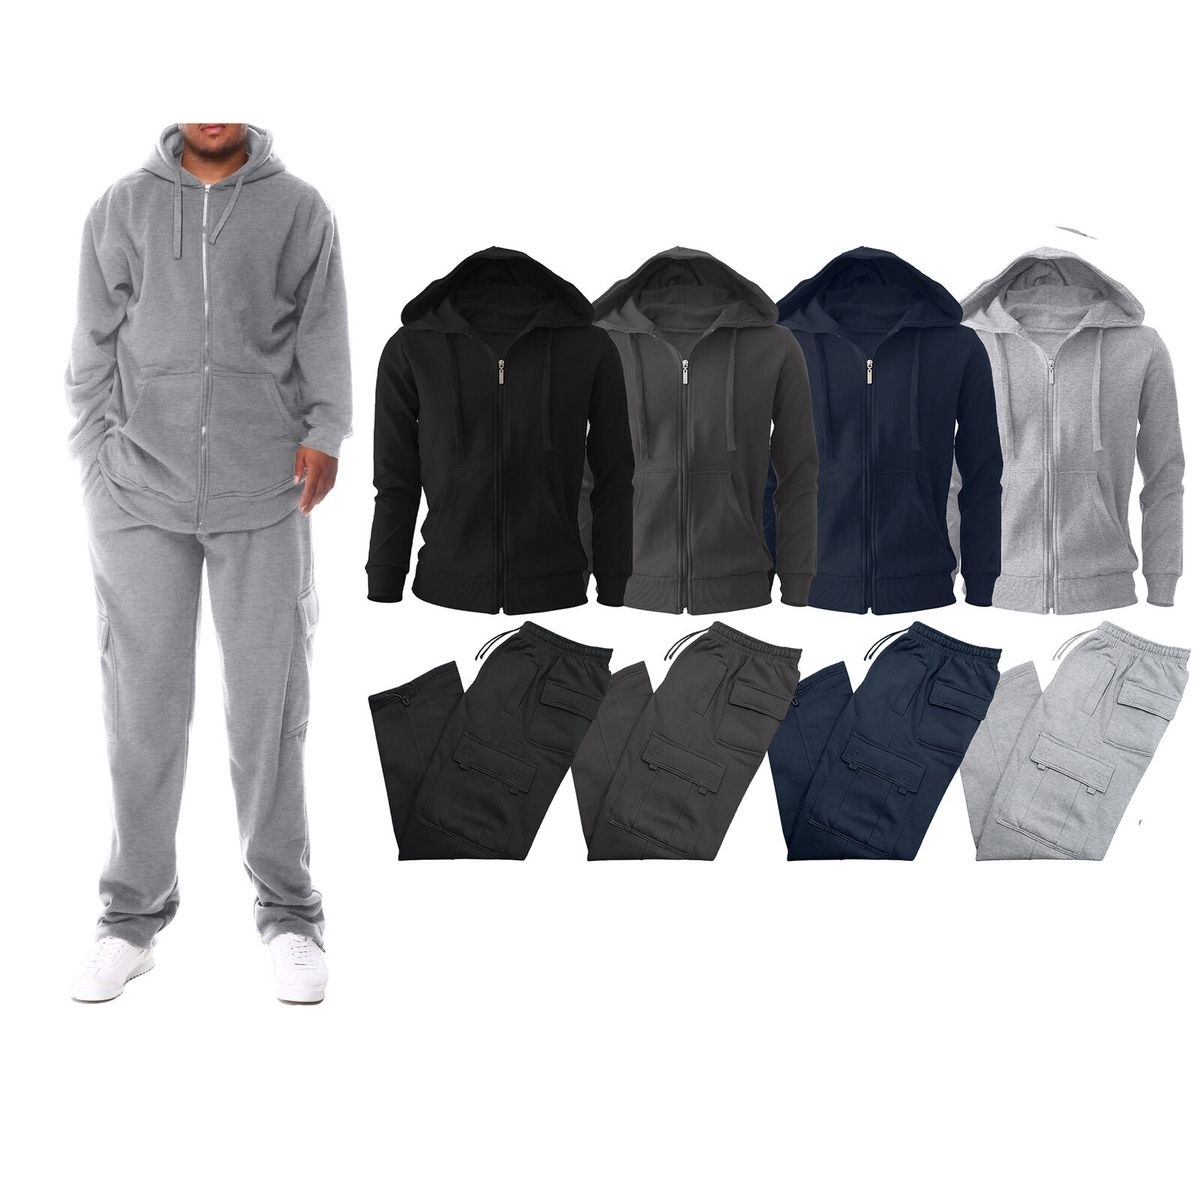 Multi-Pack: Men's Big & Tall Winter Warm Athletic Active Cozy Fleece Lined Multi-Pocket Full Zip Up Cargo Tracksuit - Charcoal, 1-pack, Medi